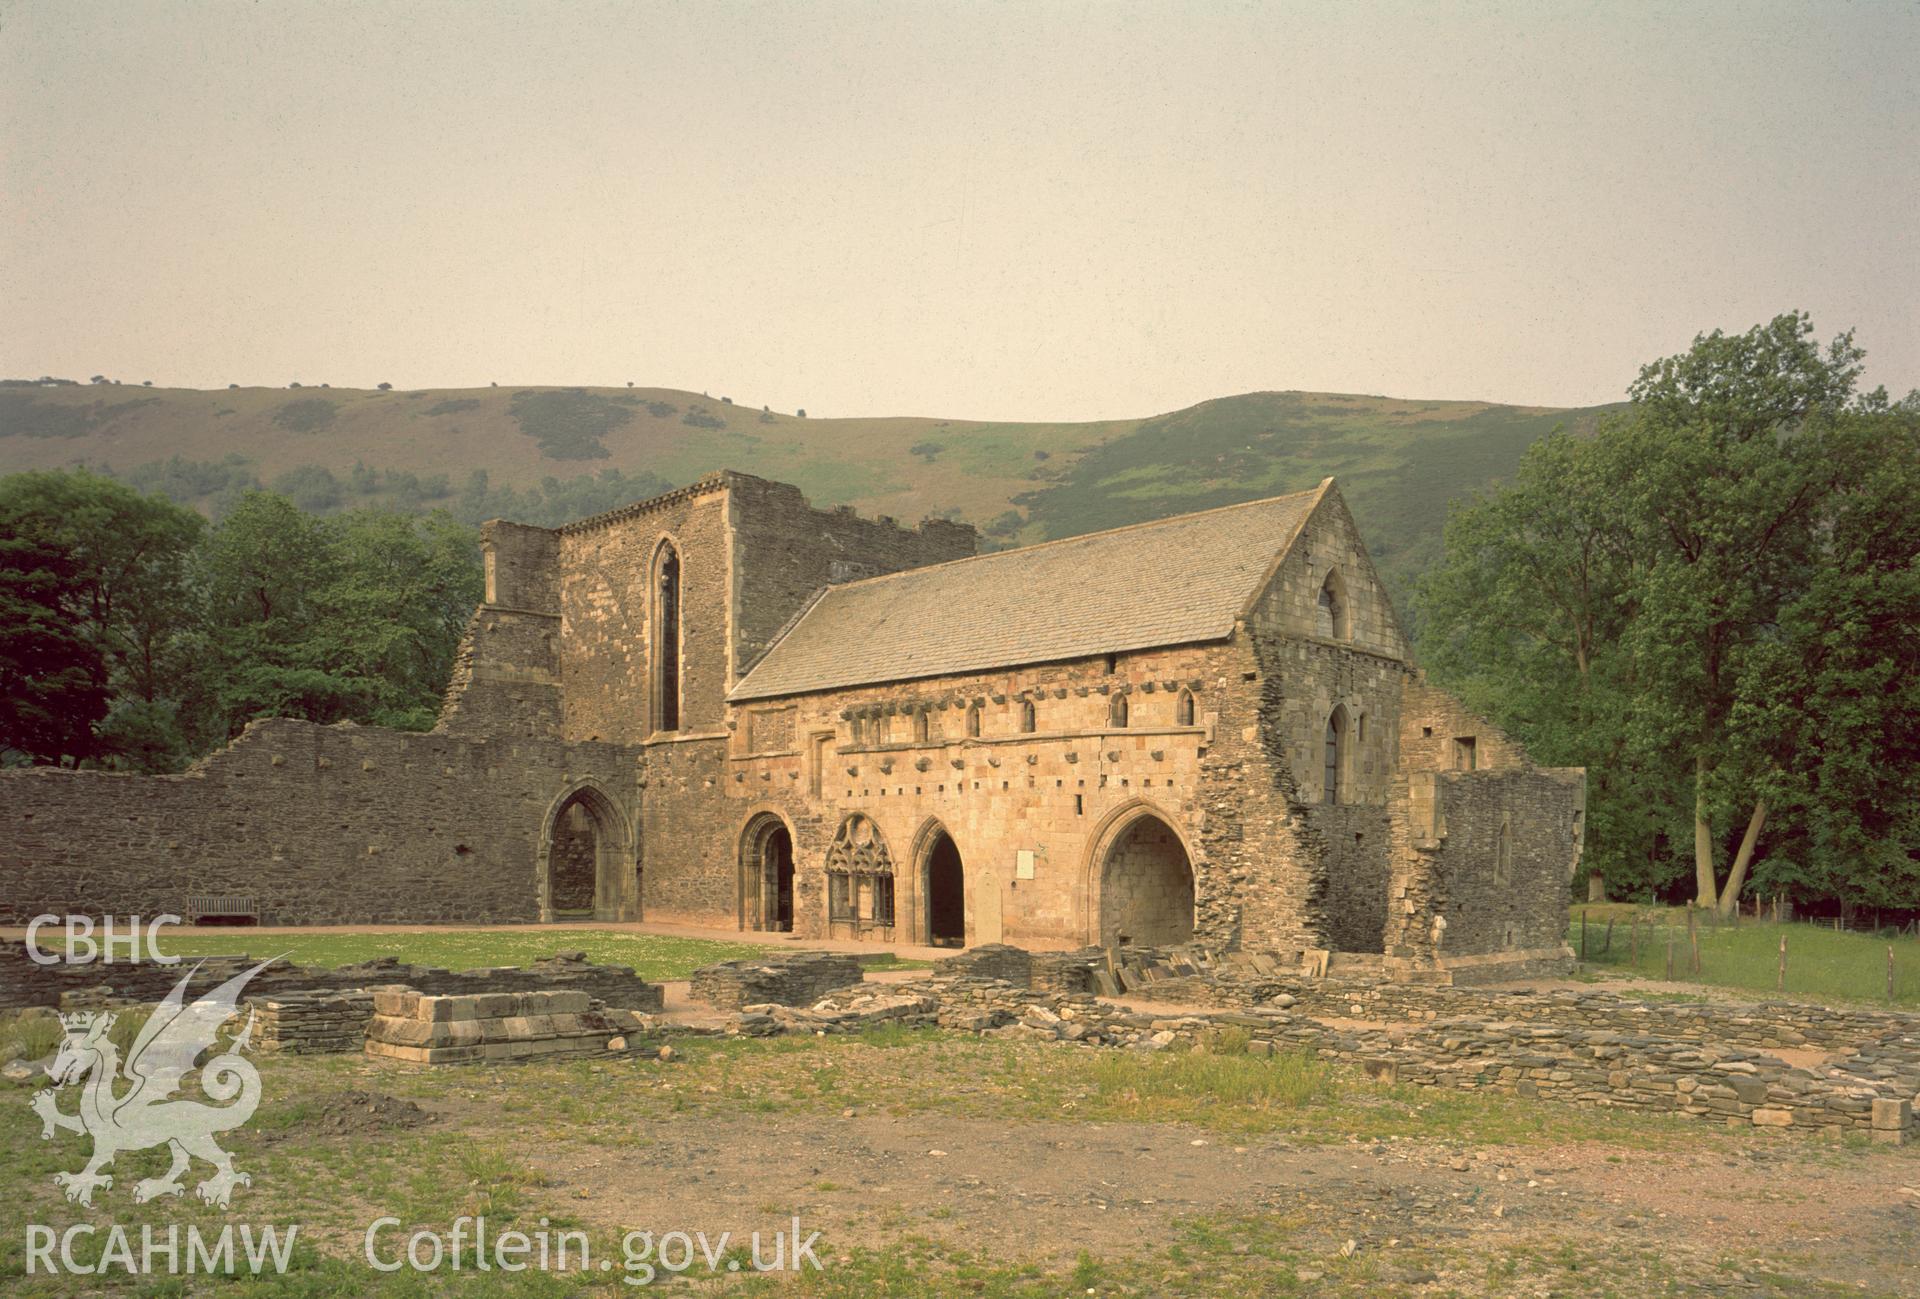 View of the east range of cloisters at Valle Crucis Abbey taken in 1975.